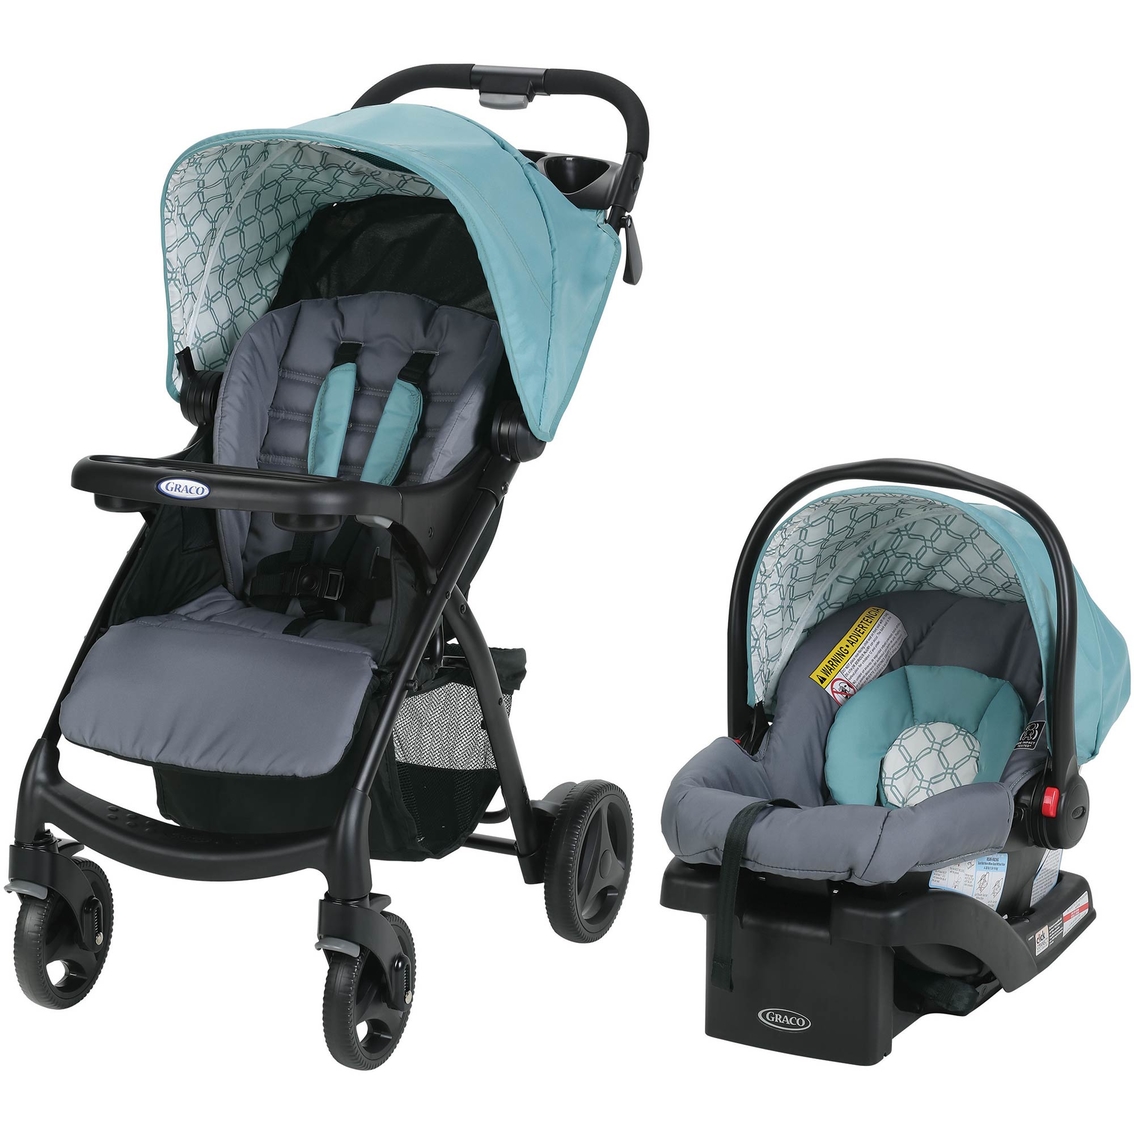 Graco Verb Travel System with Snugride 30 Infant Car Seat - Image 1 of 3